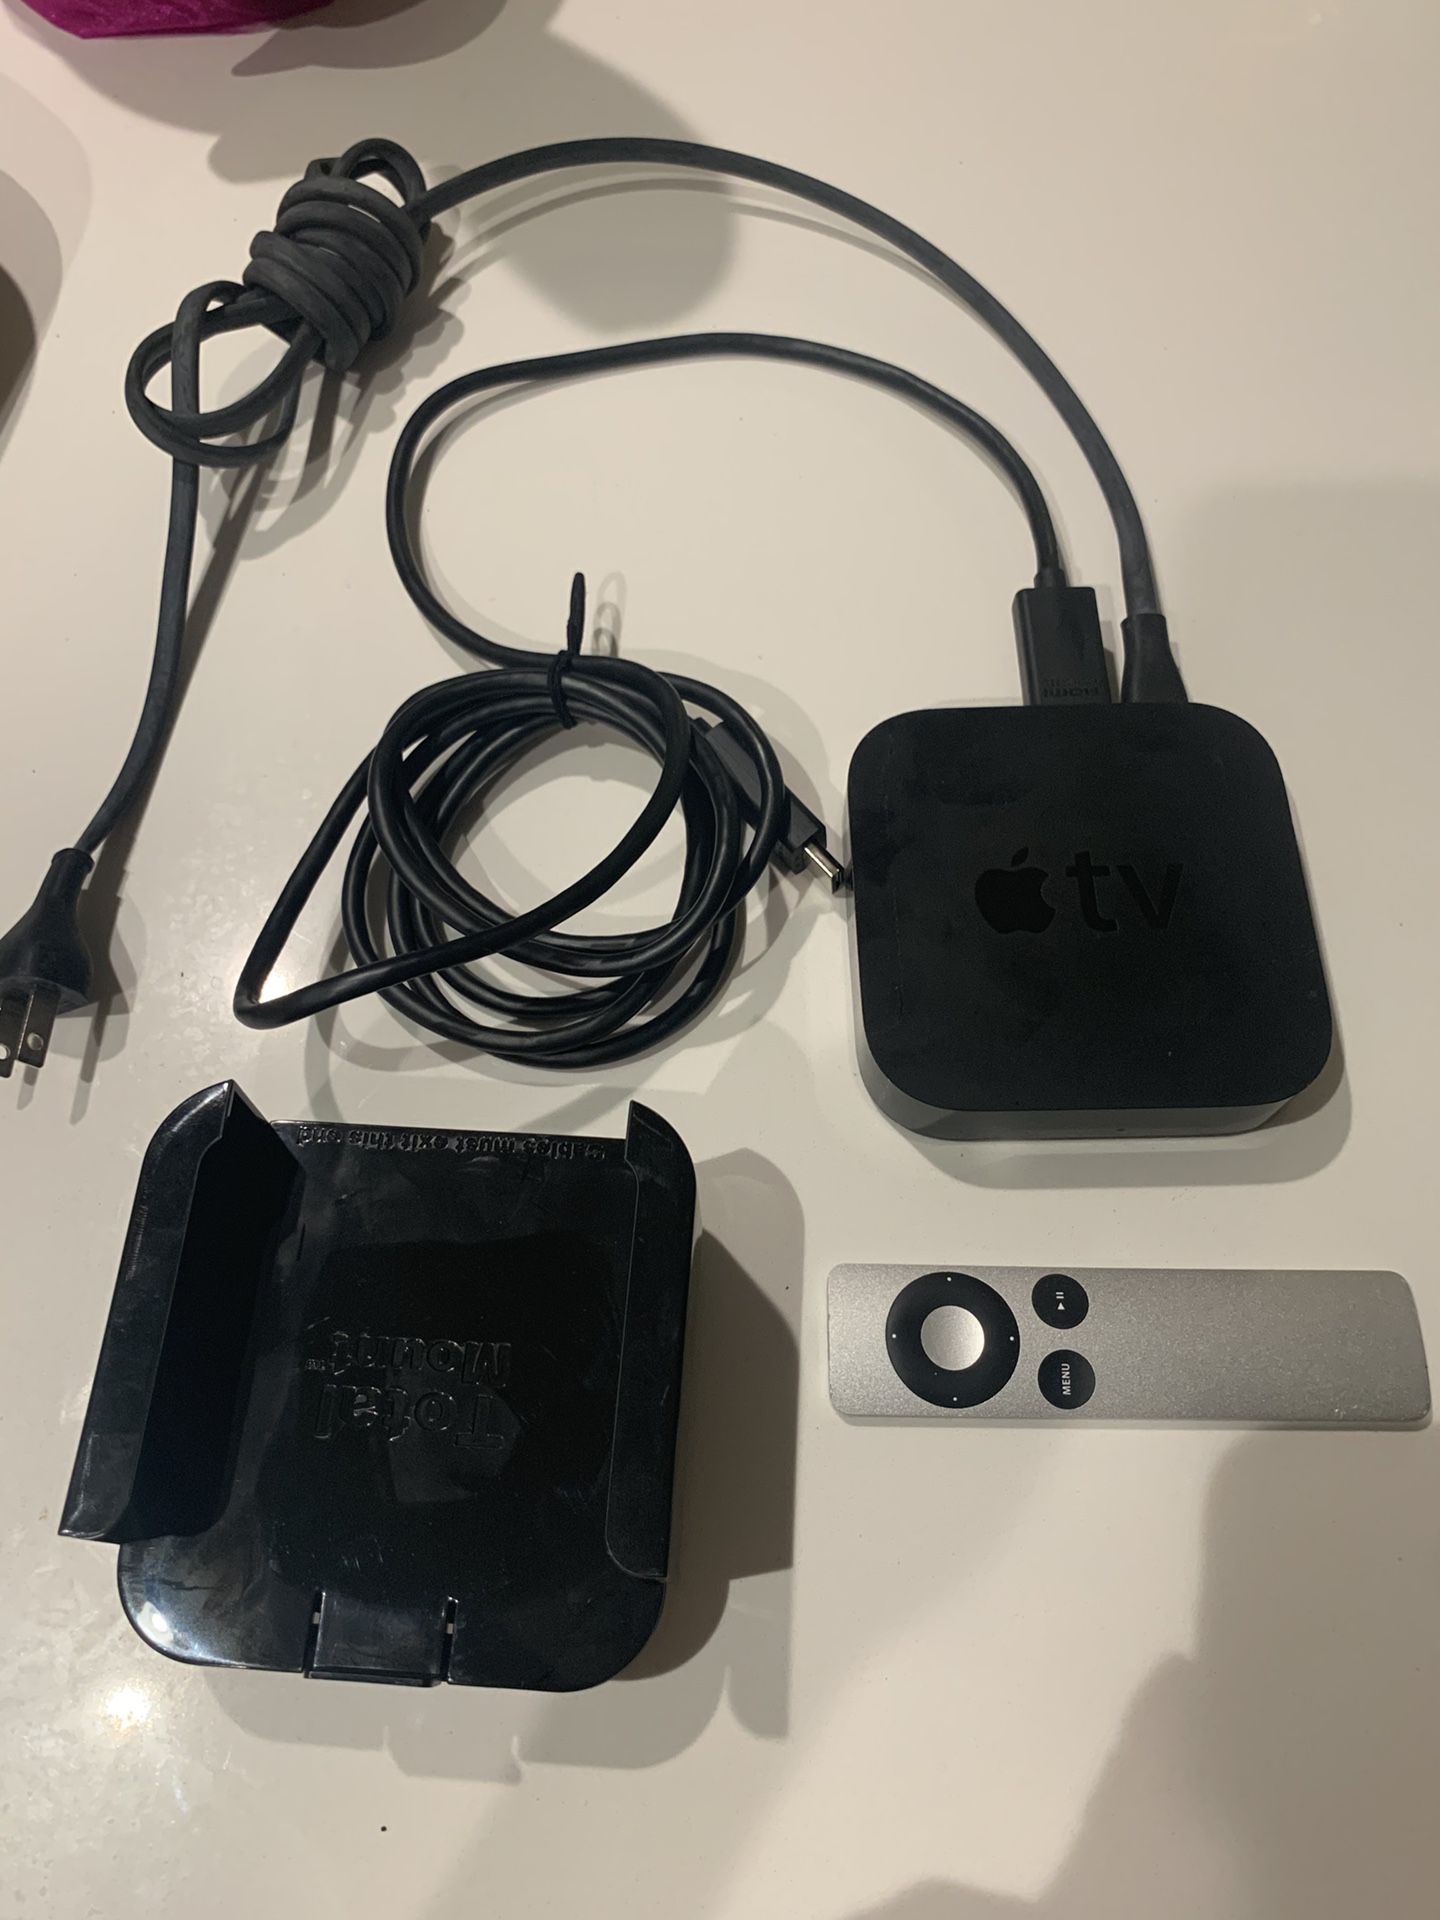 Apple TV with mount 2nd generation